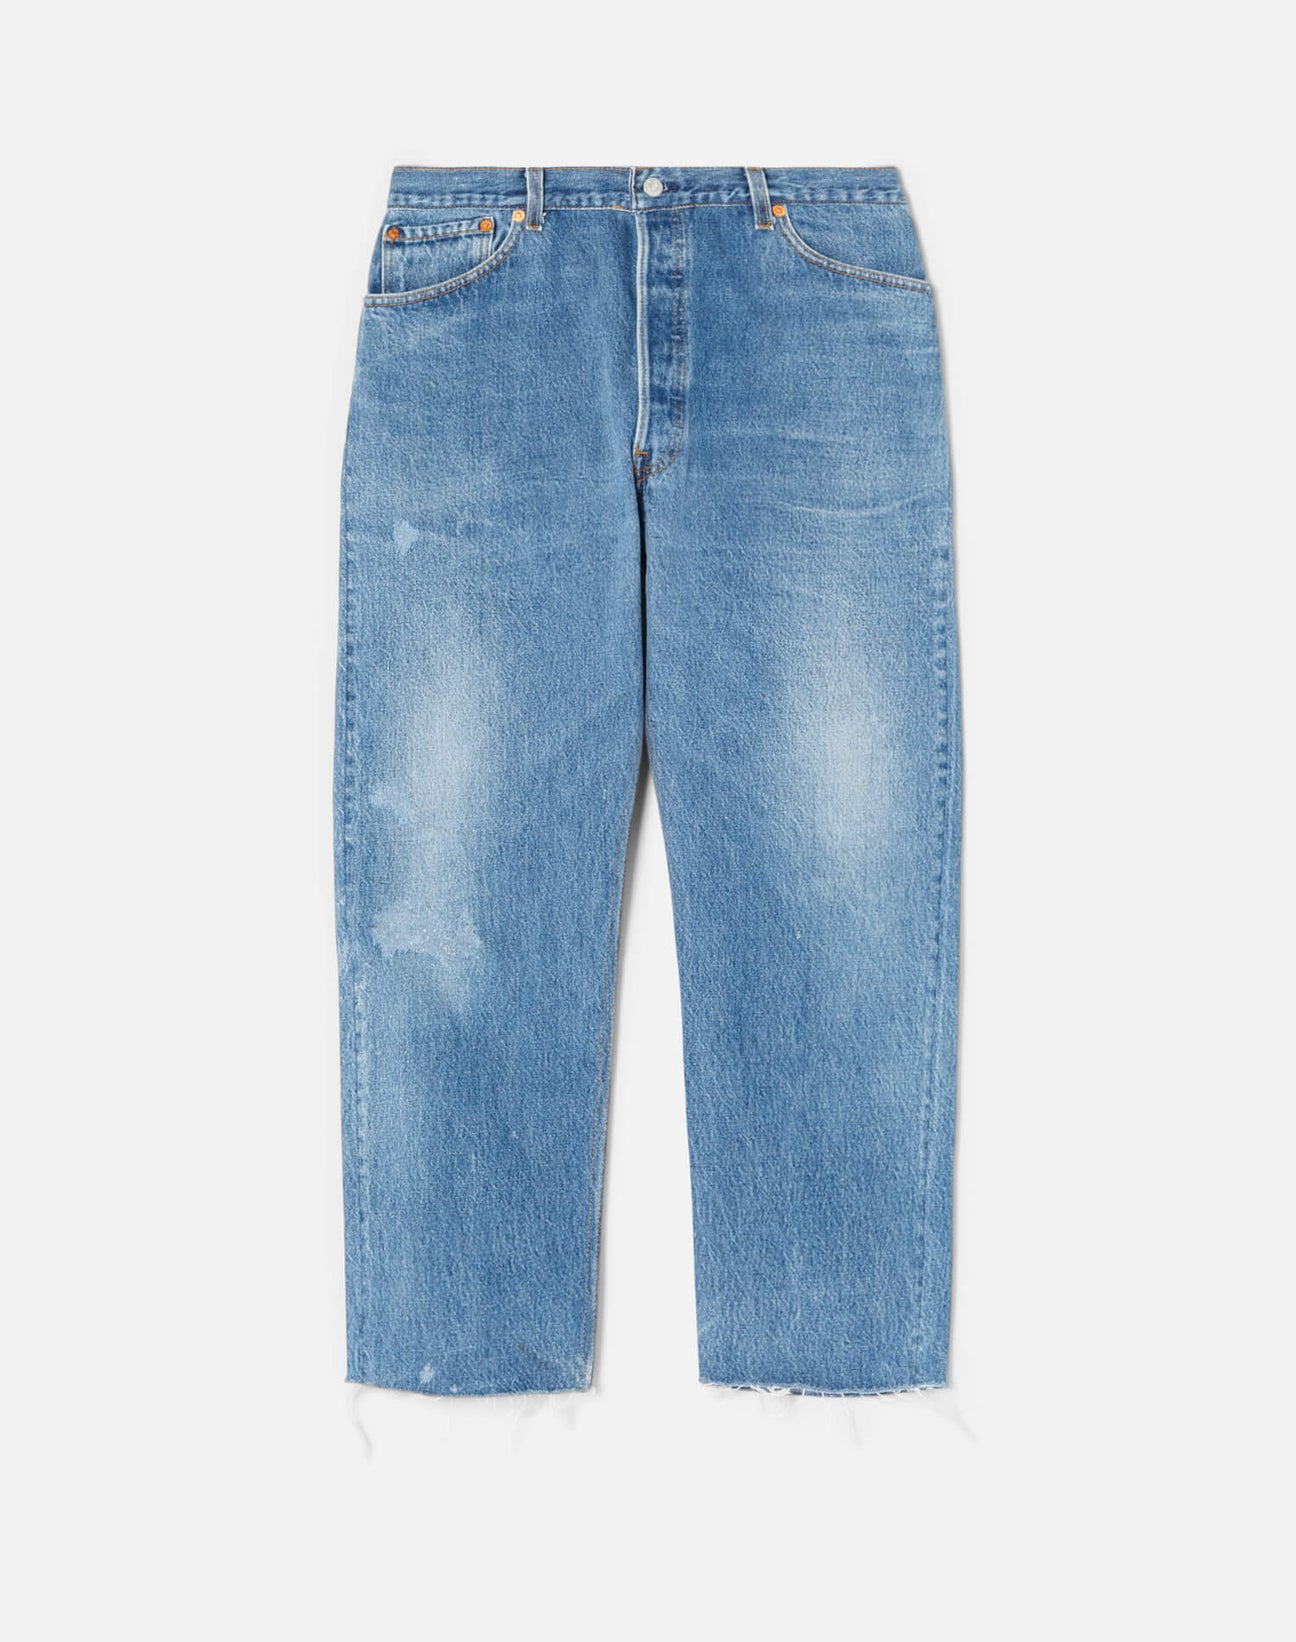 Size 29 | RE/DONE + Levi's